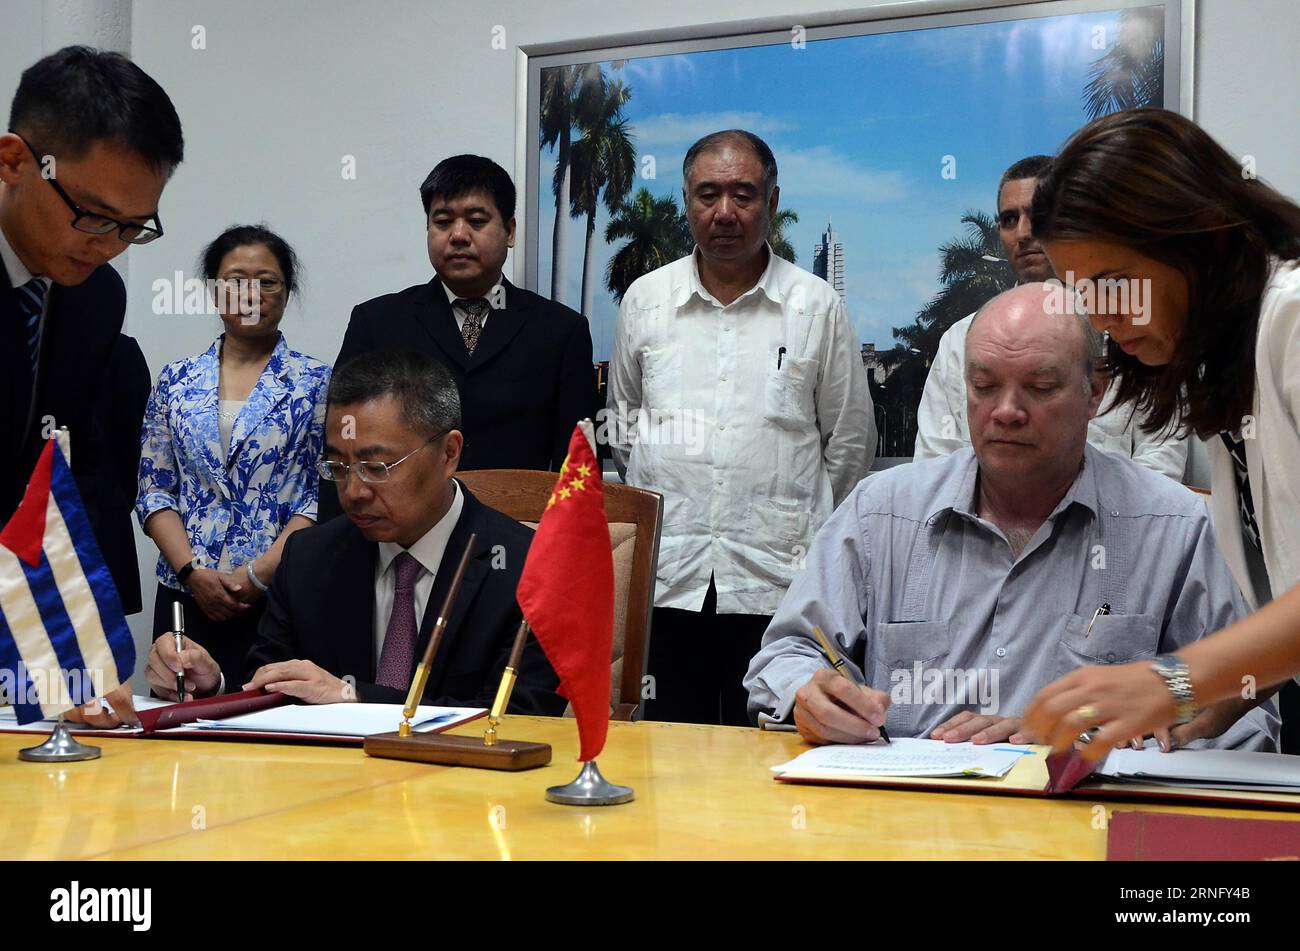 Zhang Xiangchen (2nd L F), deputy international trade representative with China s Ministry of Commerce, and Rodrigo Malmierca (2nd R), Cuba s Minister of Foreign Trade and Investment, sign the conclusive documents for joint projects in the sectors of telecommunications, industry and water resources in Havana, Cuba, on Aug. 26, 2016. Cuba and China on Friday signed new agreements aimed at deepening bilateral cooperation in a number of fields. Joaquin Hernandez) (djj) CUBA-HAVANA-CHINA-ECONOMIC COOPERATION Joaqu¨ªnxHern¨¢ndez PUBLICATIONxNOTxINxCHN   Zhang Xiangchen 2nd l F Deputy International Stock Photo